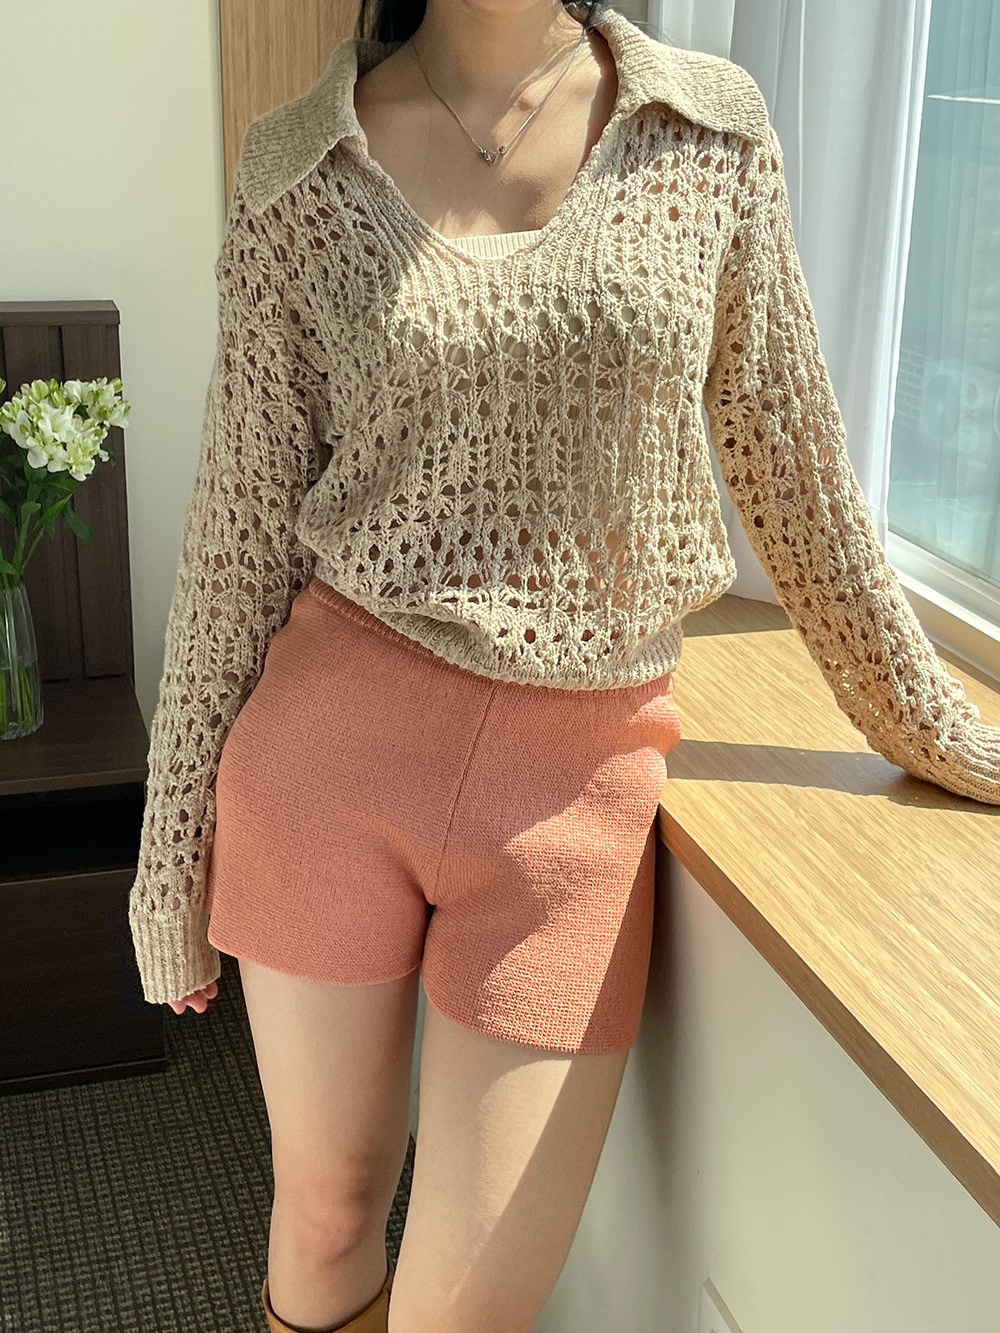 Solid-Toned Knit Shorts